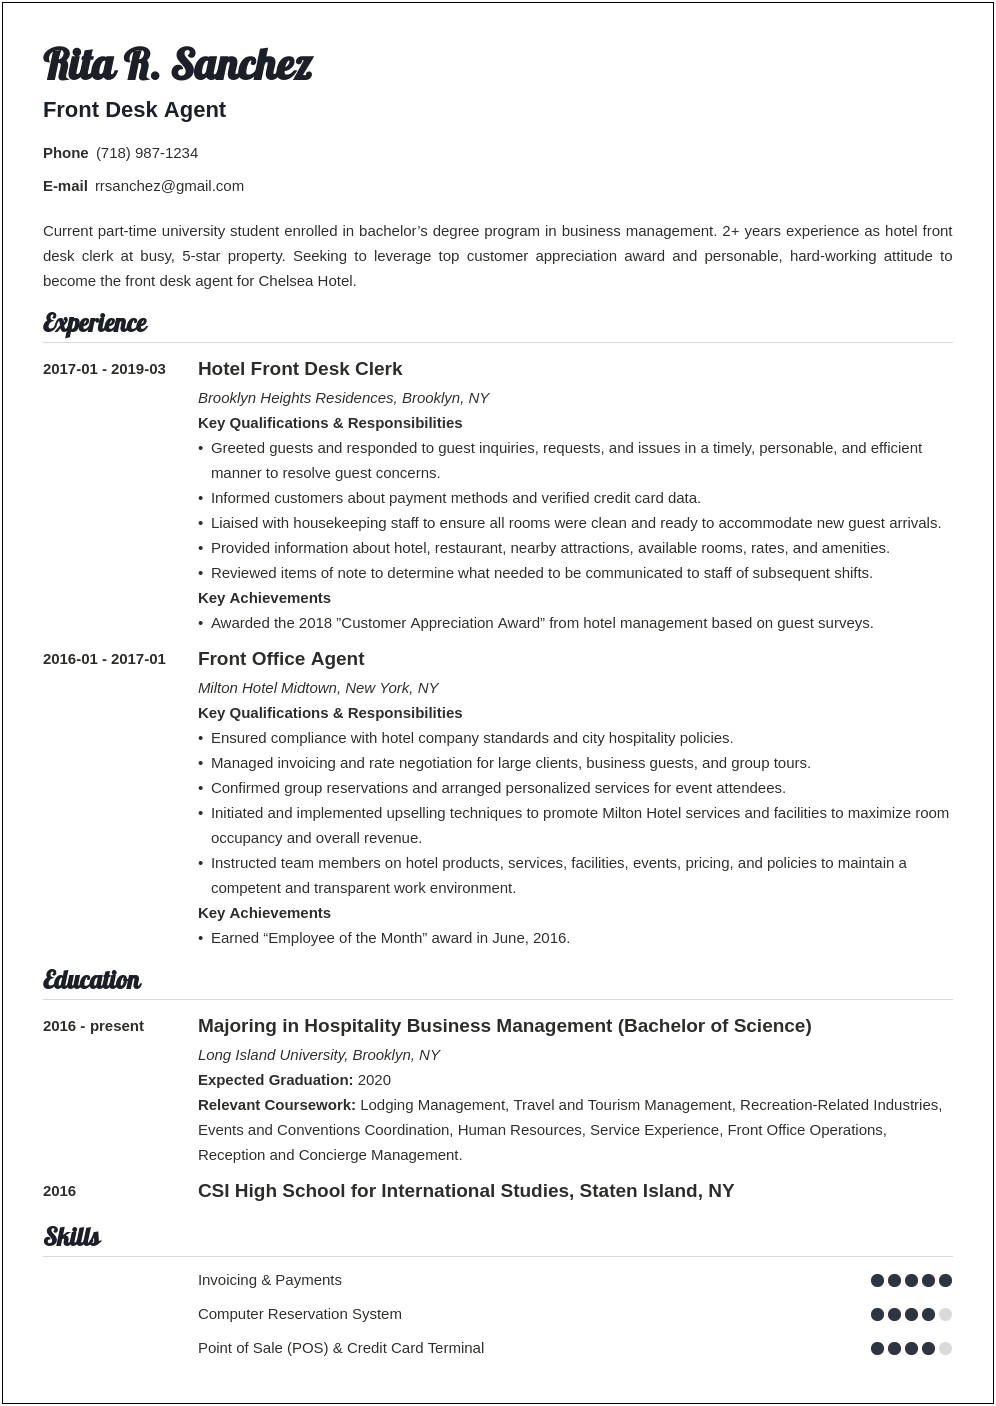 Resume Objective For A Receptionist